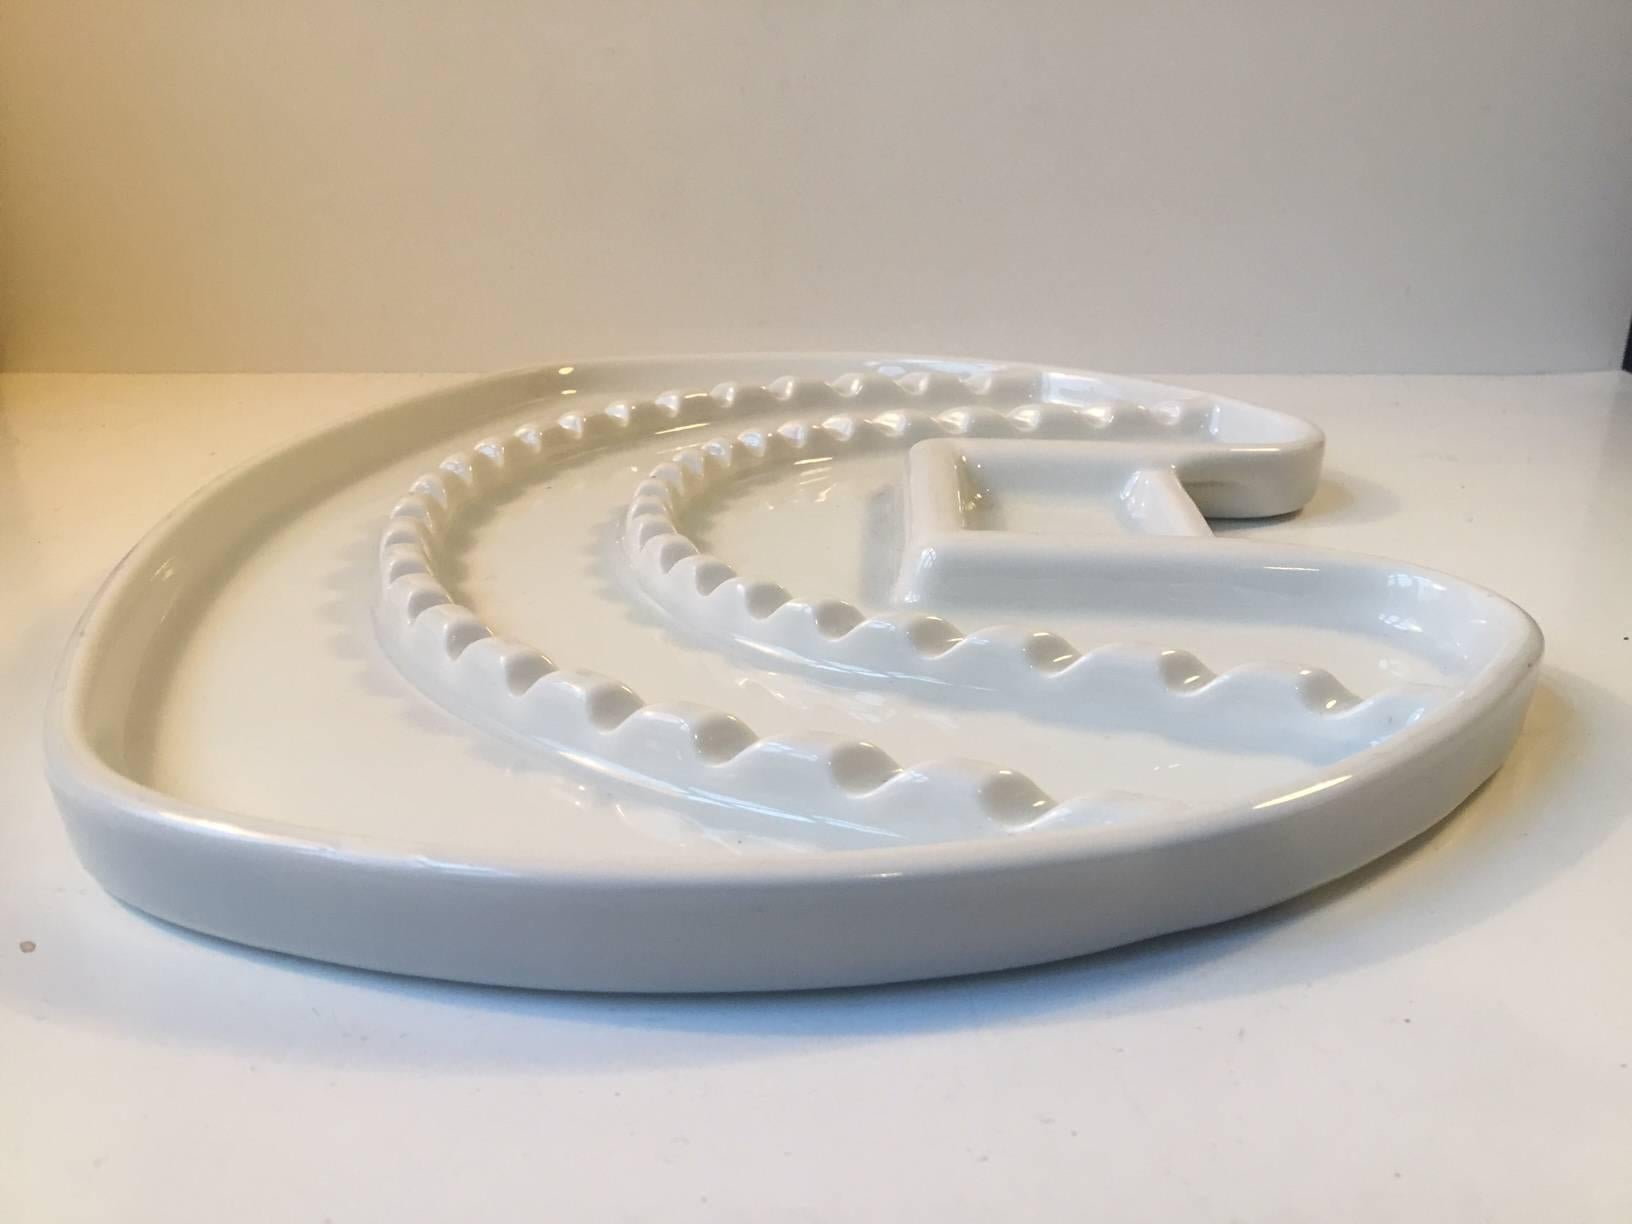 Large Tooth, Bauhaus Era Porcelain Tray for Dental Instruments, Germany, 1930s In Good Condition For Sale In Esbjerg, DK